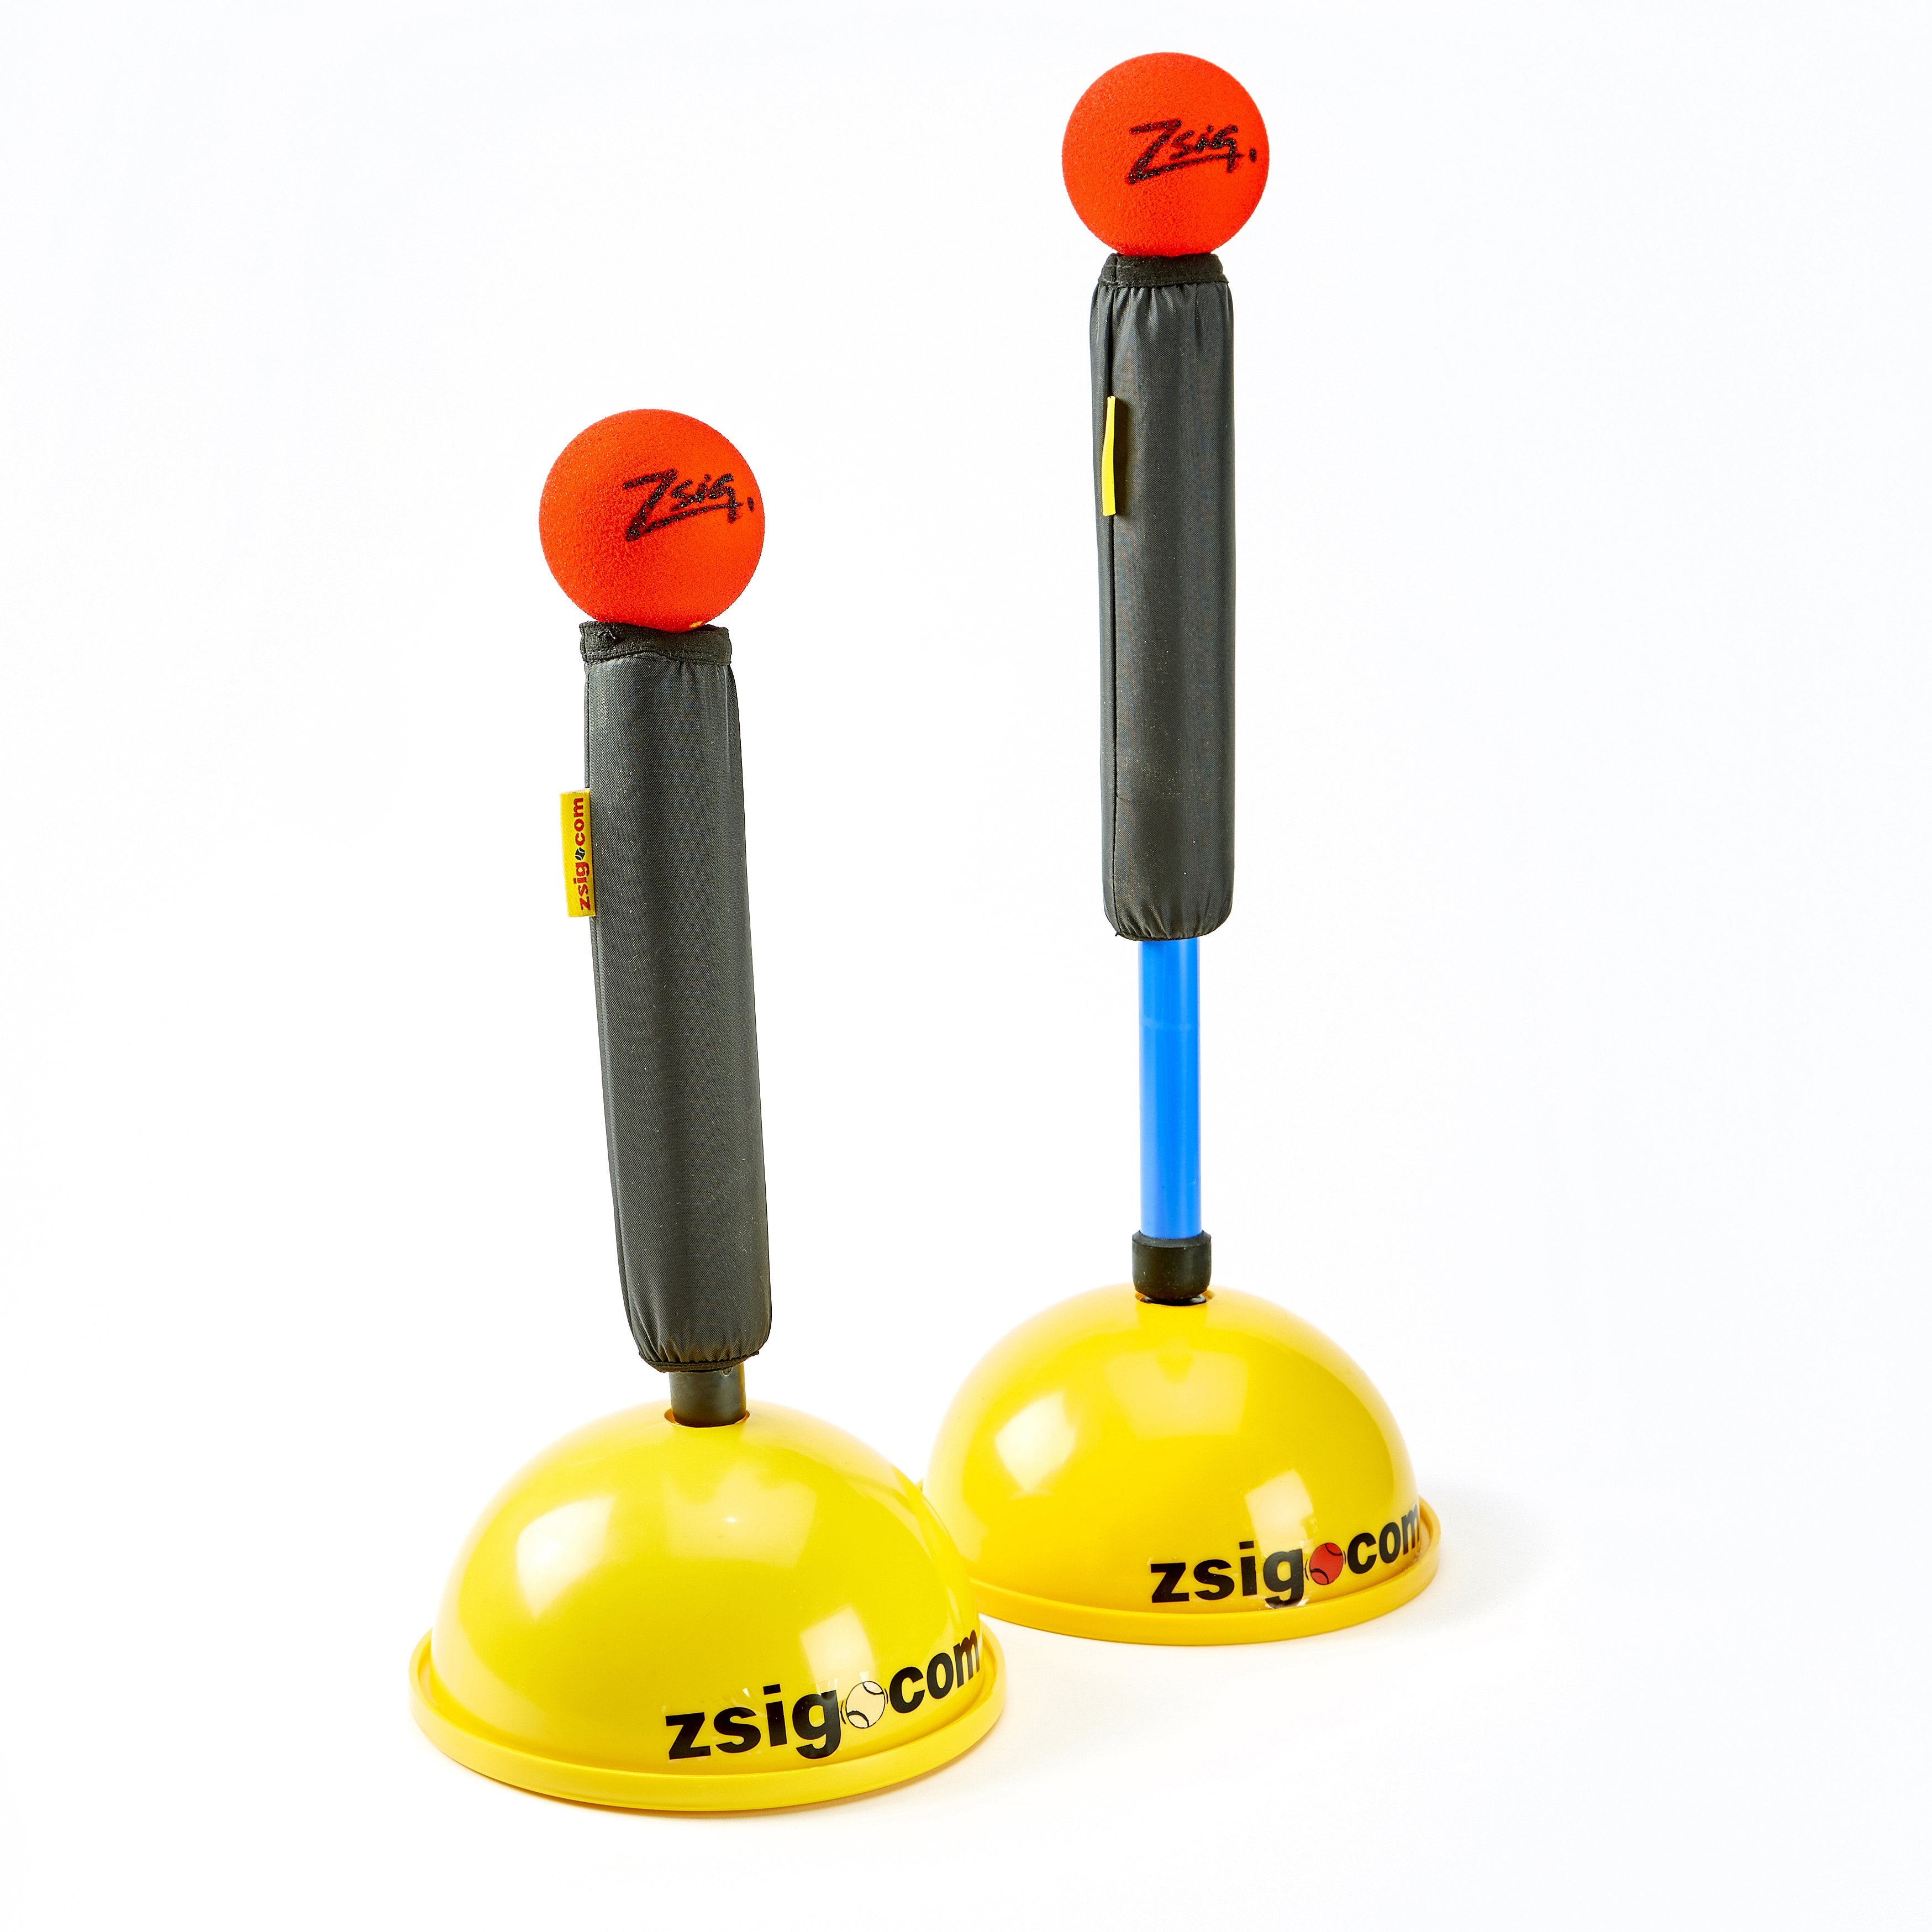 ZSIG Bounce Back Hitting Tee with sponge balls in position. One raised, one at lower height.